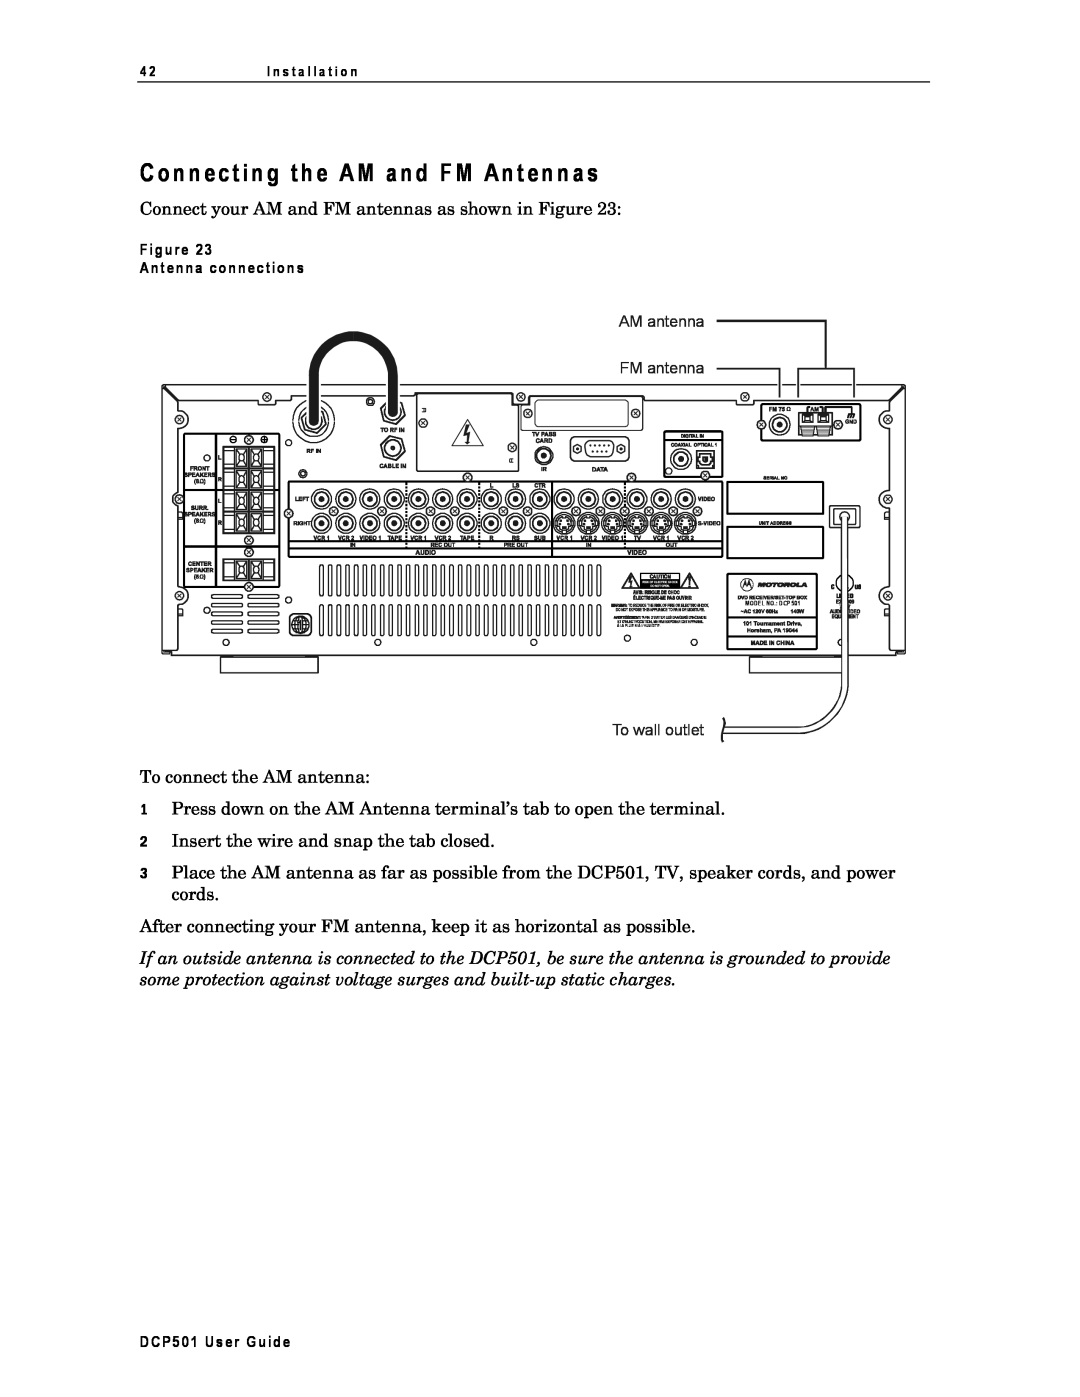 Motorola DCP501 manual Connect your AM and FM antennas as shown in Figure 